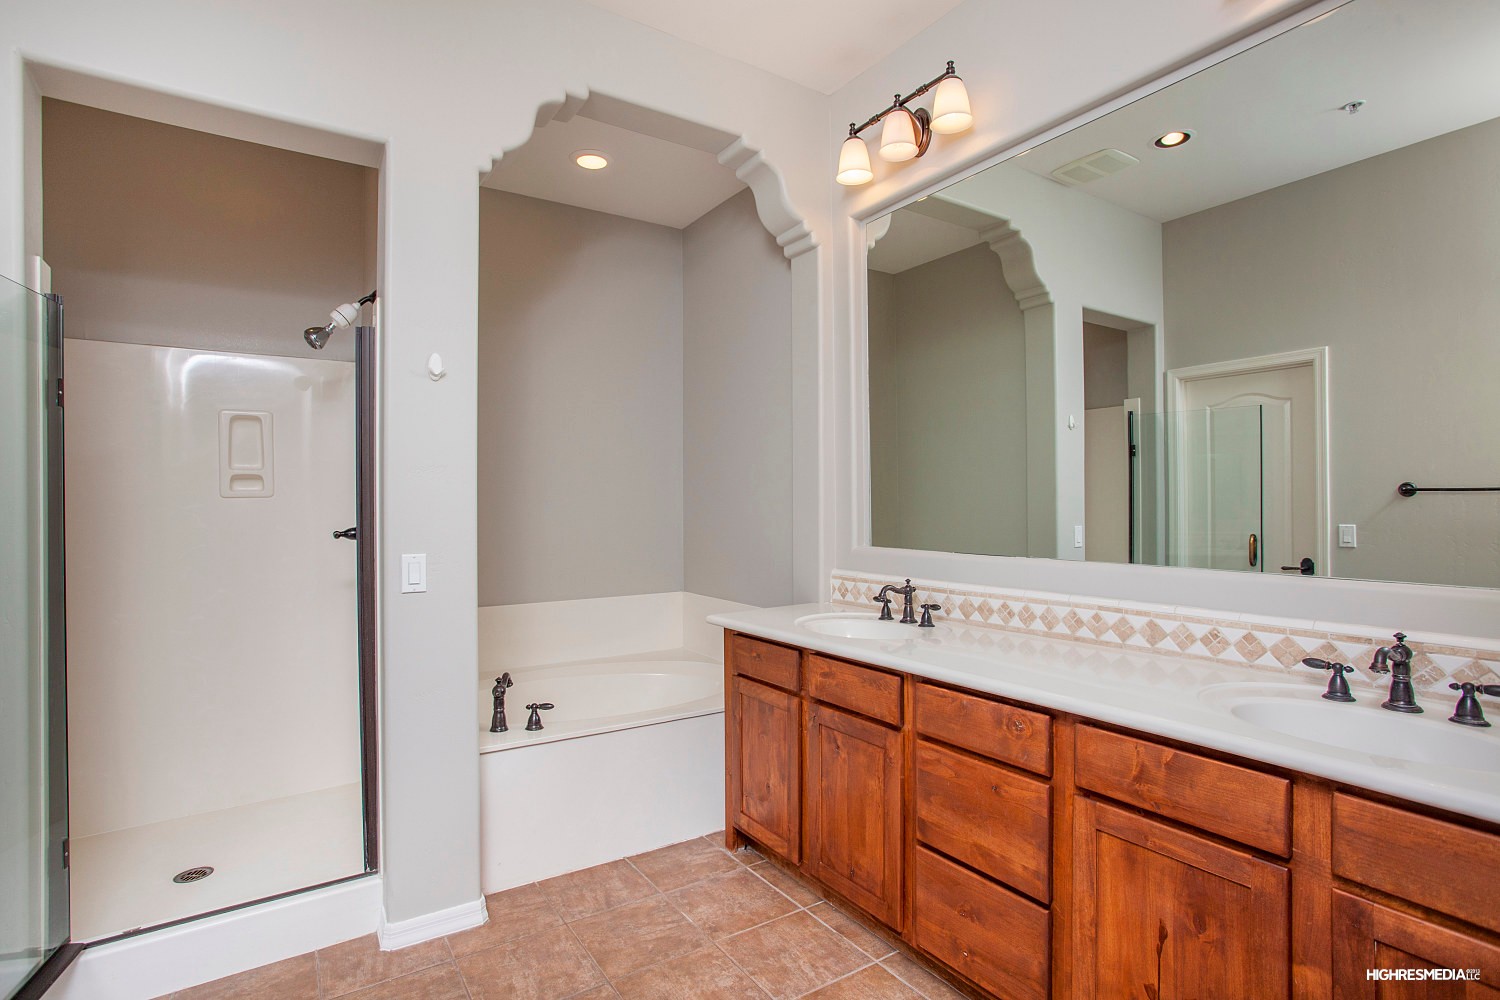 Separate shower and soaking tub at this Scottsdale townhome for sale in Market Street at DC Ranch located at 20704 N 90th Pl #1005 Scottsdale, AZ 85255 listed by Don Matheson at The Matheson Team